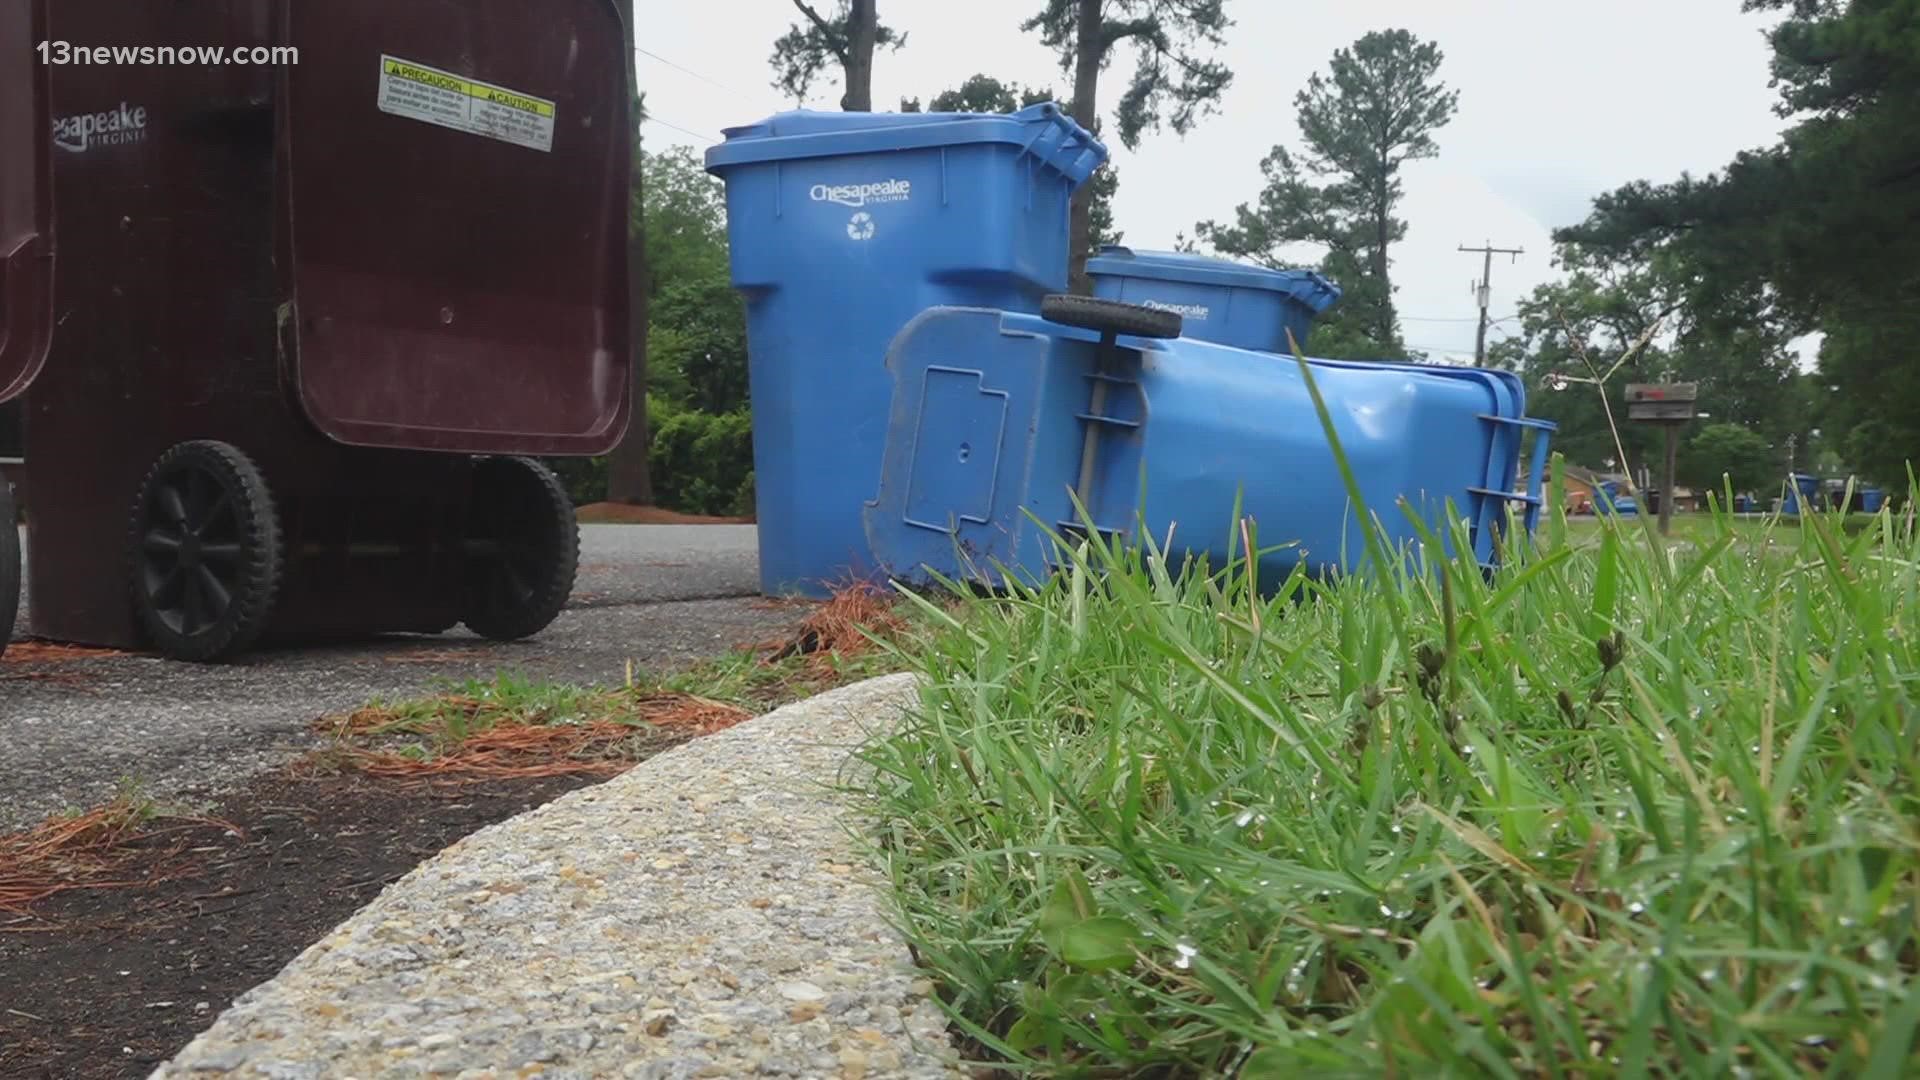 Over the summer, the City of Chesapeake voted to end city-funded curbside recycling, despite a petition with more than 7,000 signatures asking them to keep it.